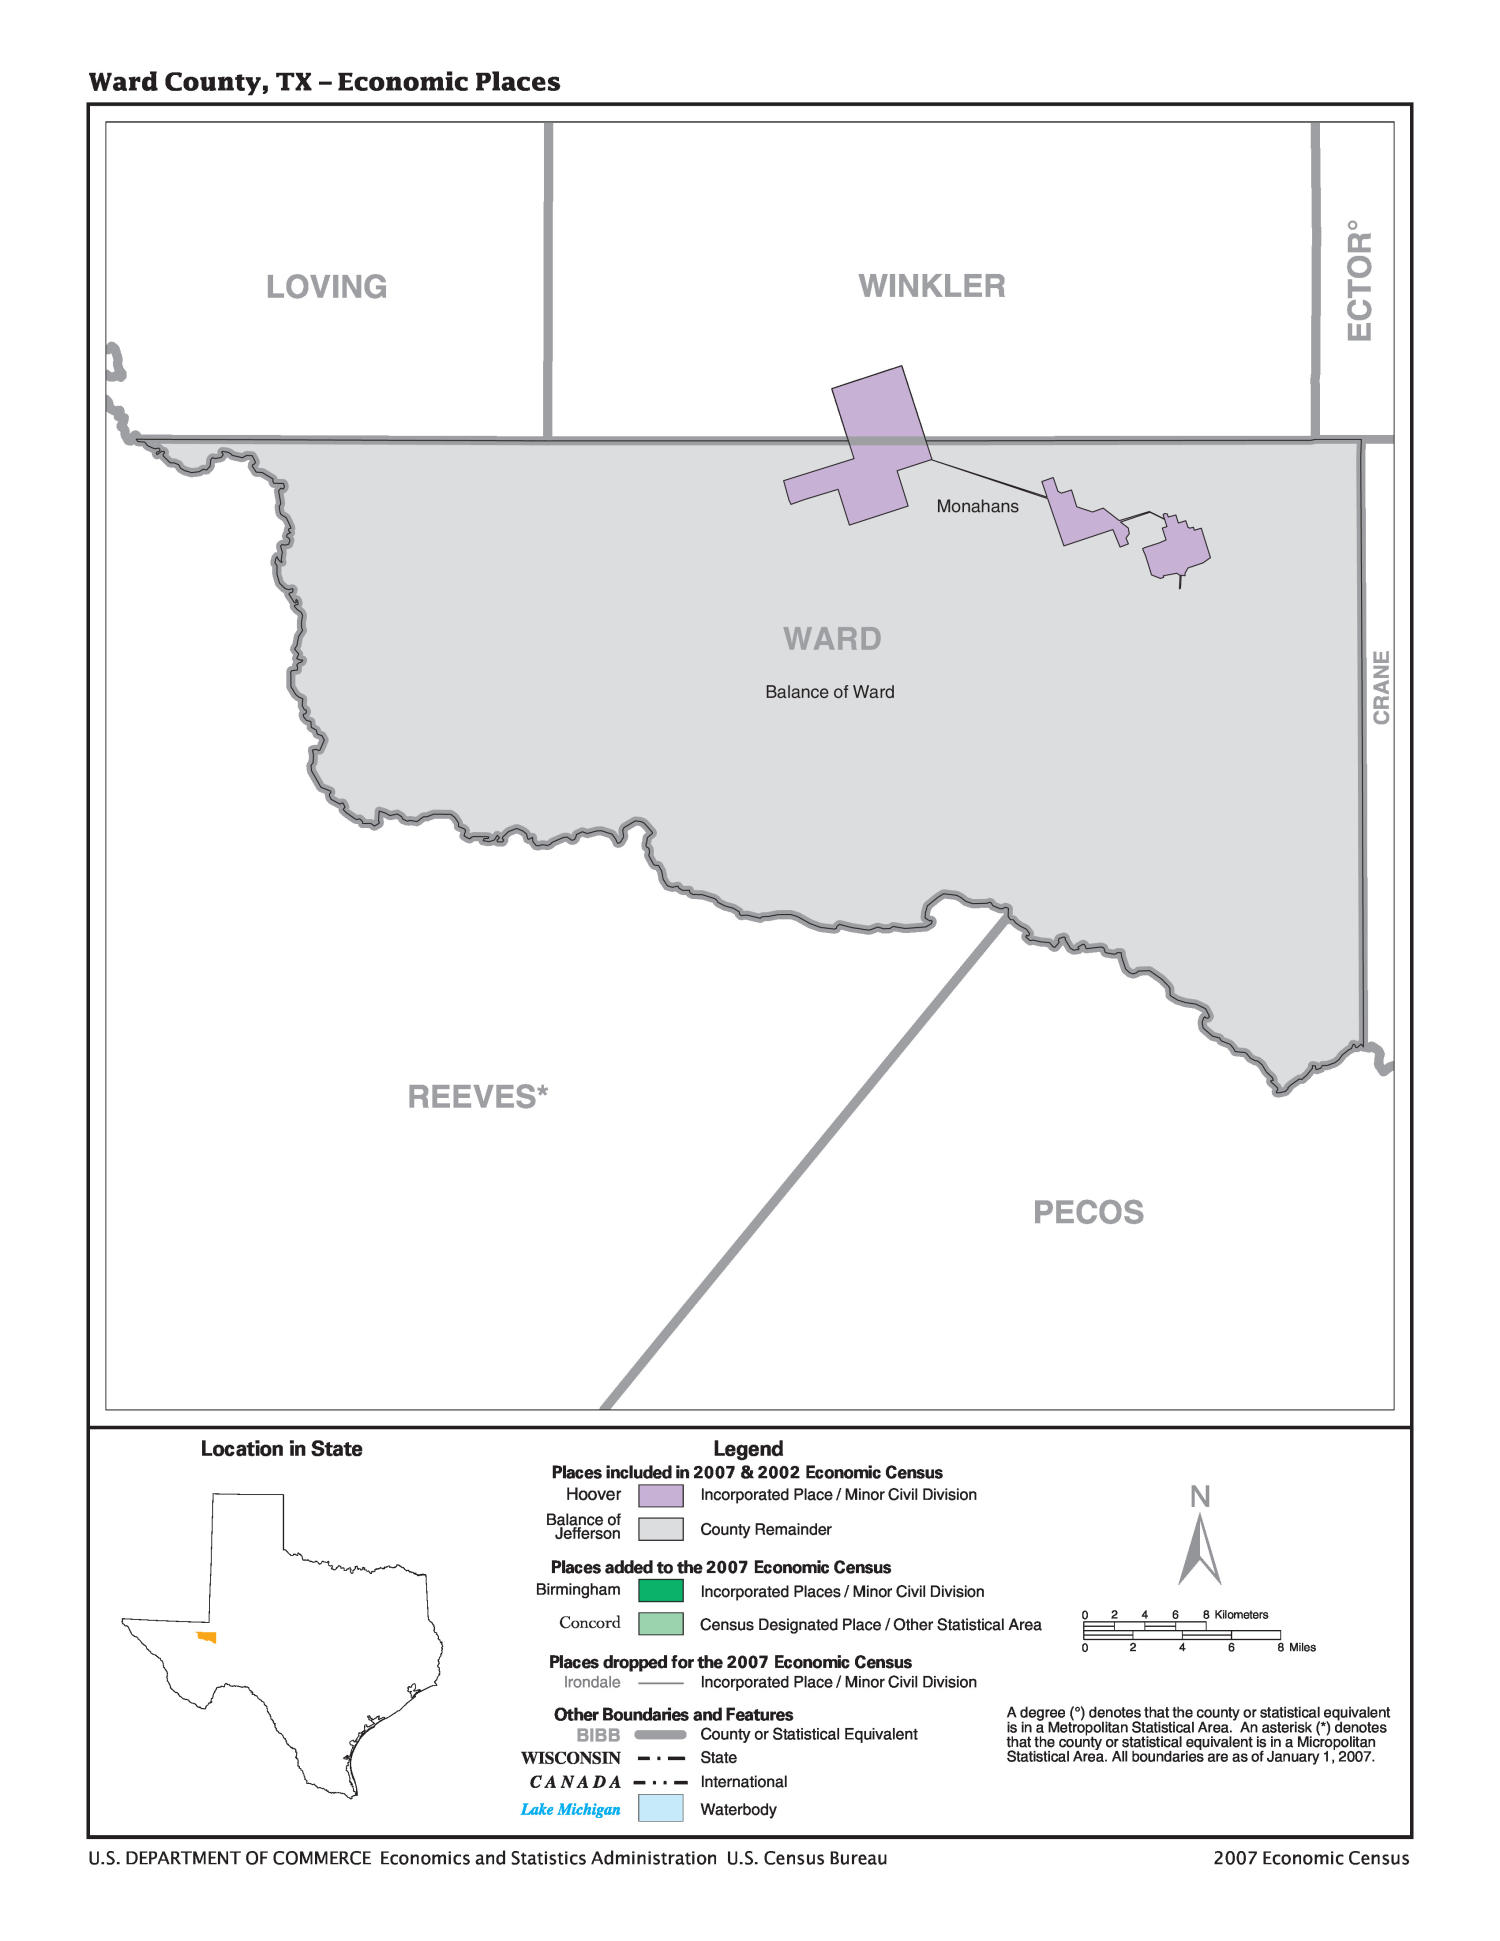 2007 Economic Census Map: Ward County, Texas - Economic Places
                                                
                                                    [Sequence #]: 1 of 1
                                                